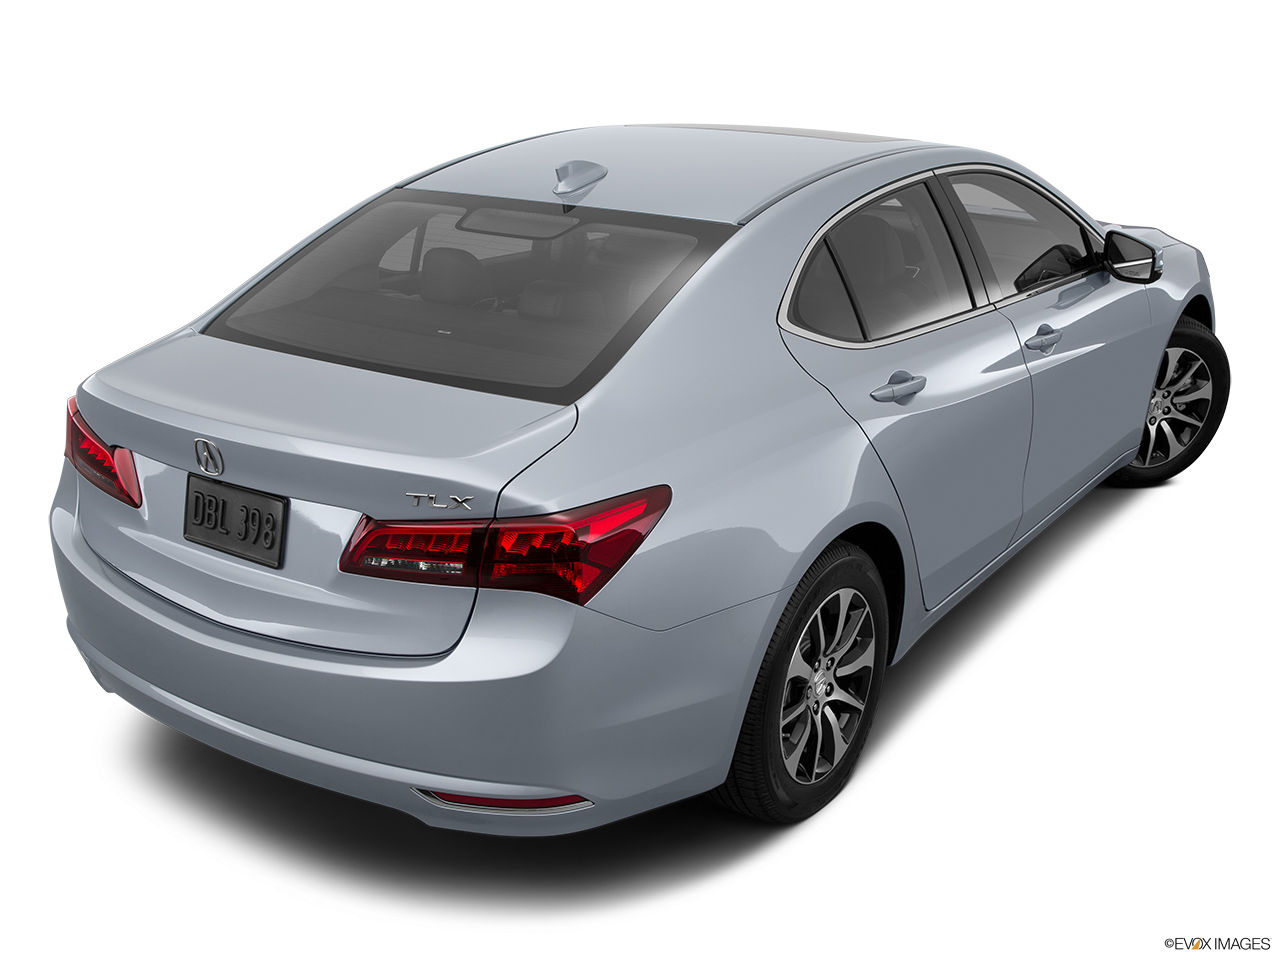 2015 Acura TLX 2.4 8-DCP P-AWS Rear 3/4 angle view. 